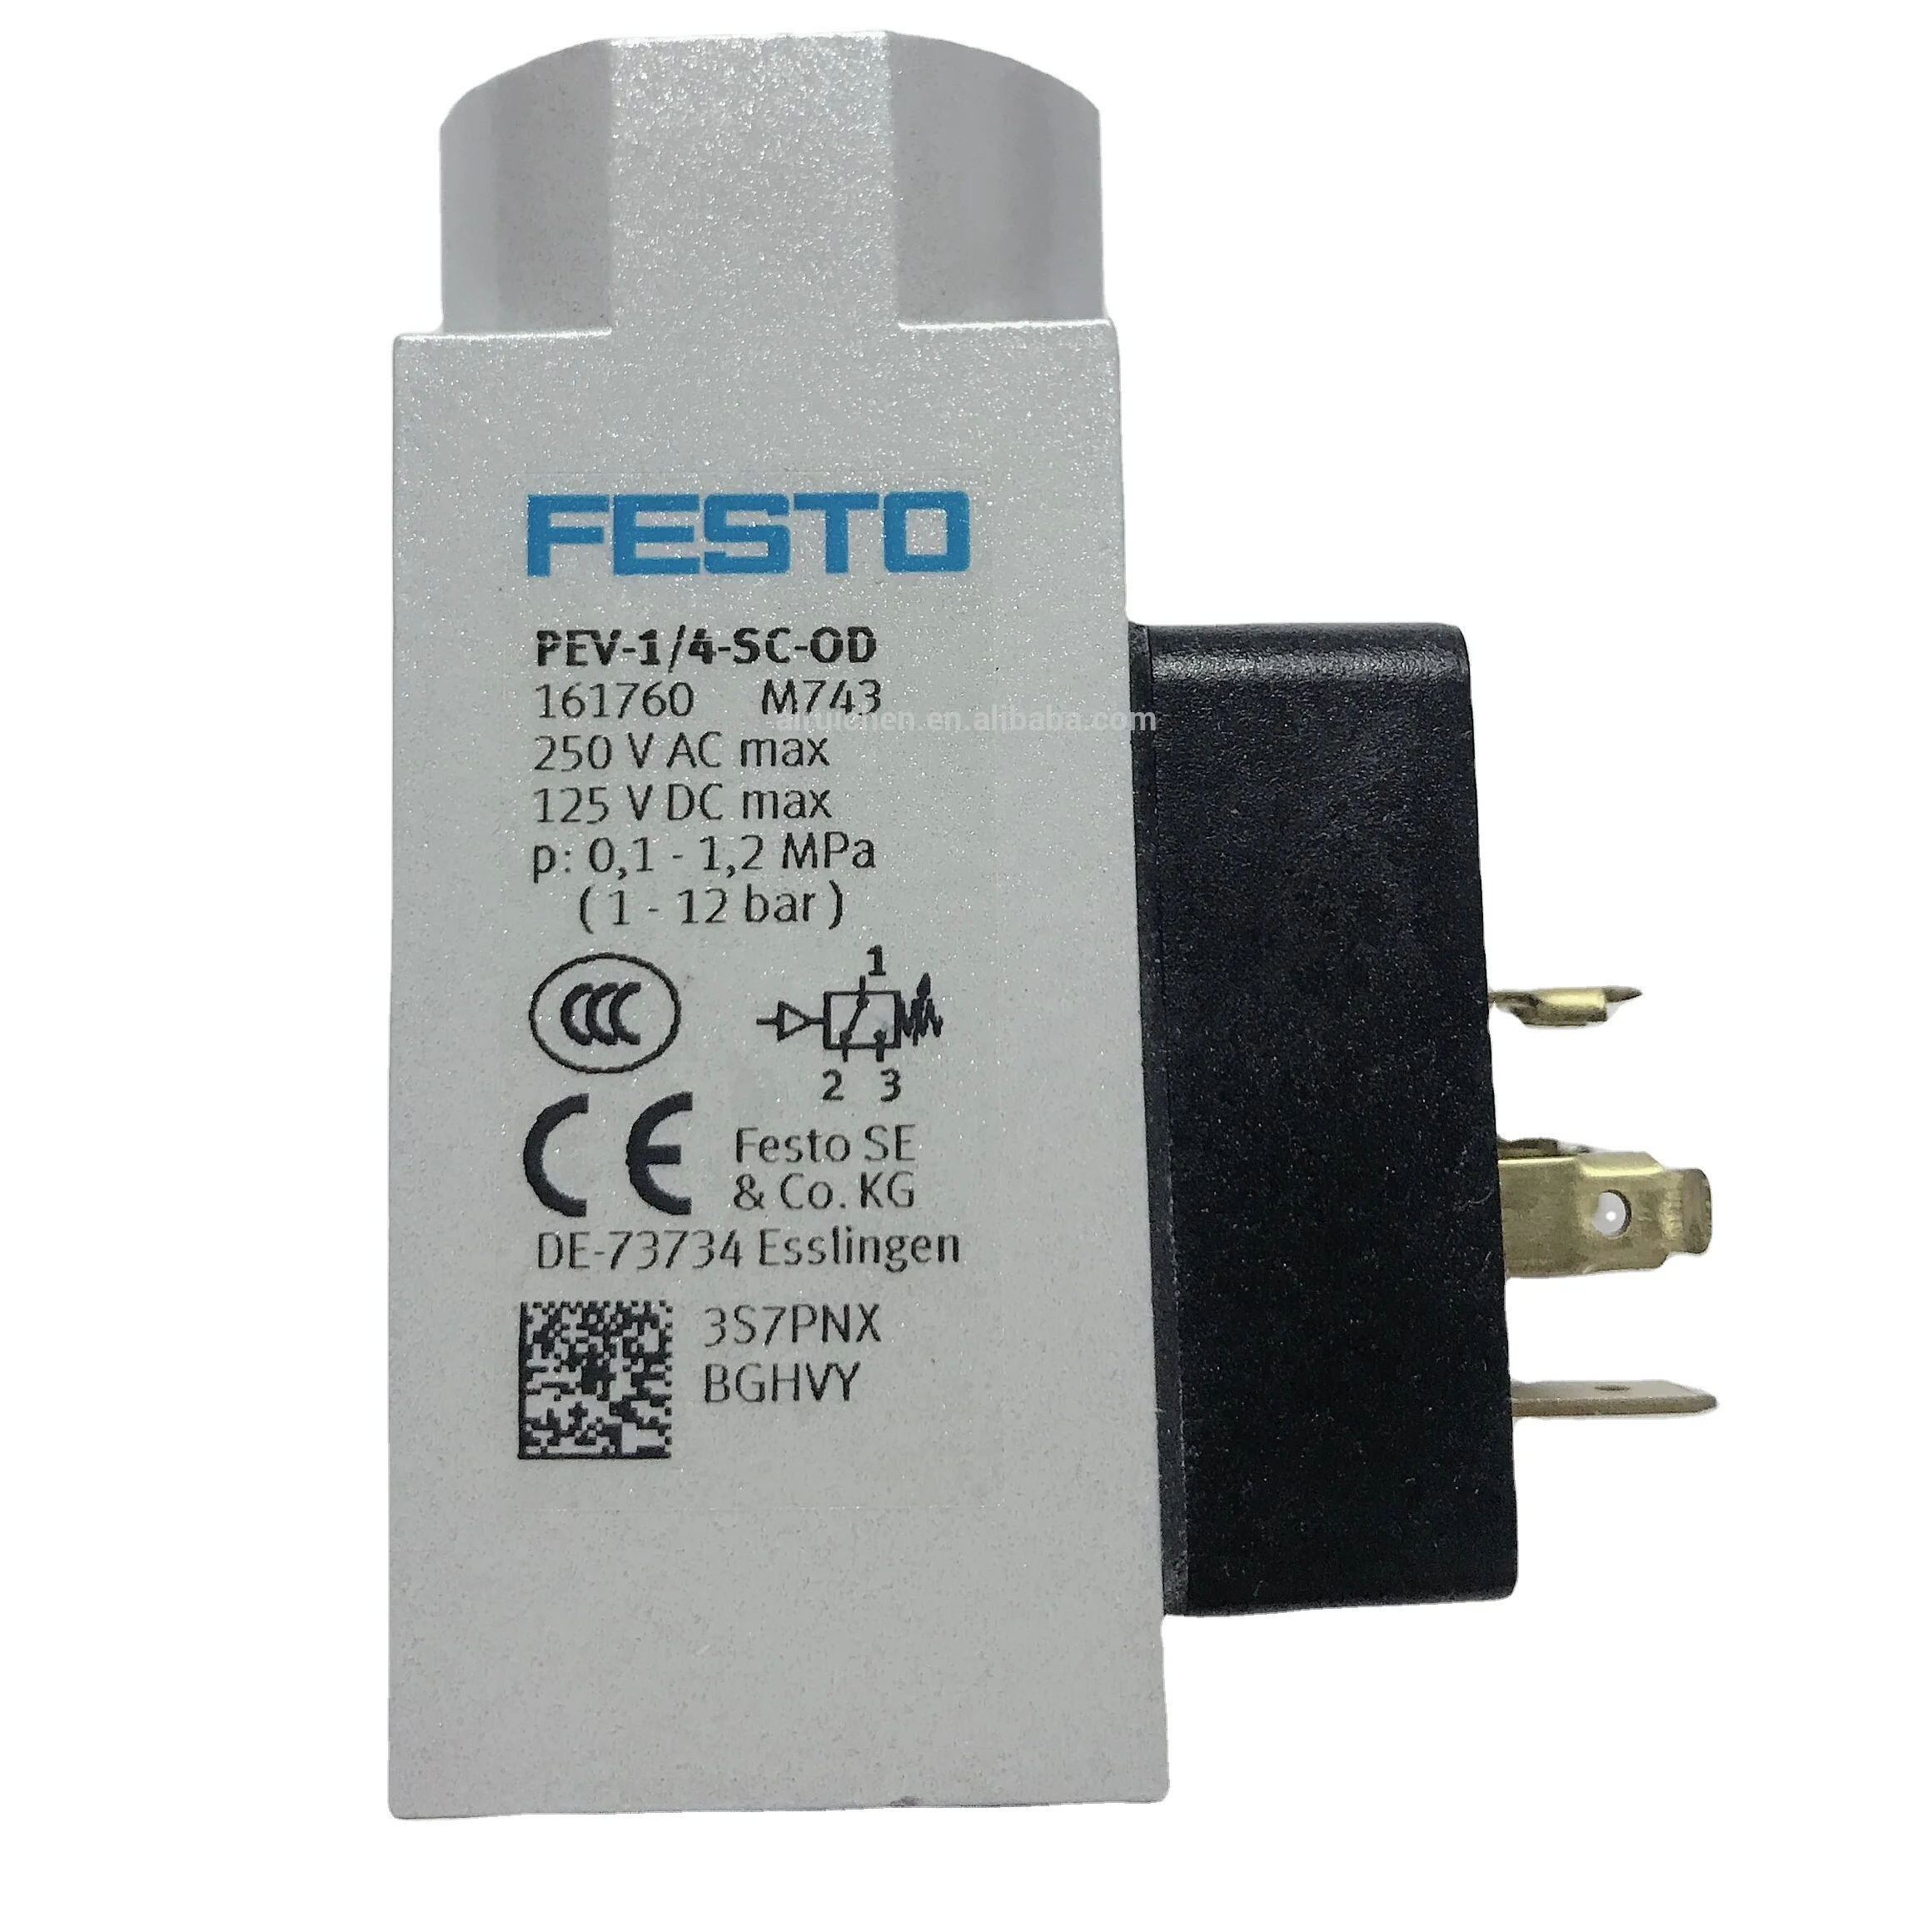 New and original FESTO-Germany Pneumatic components 161760 PEV-1/4-SC-OD Pressure switches